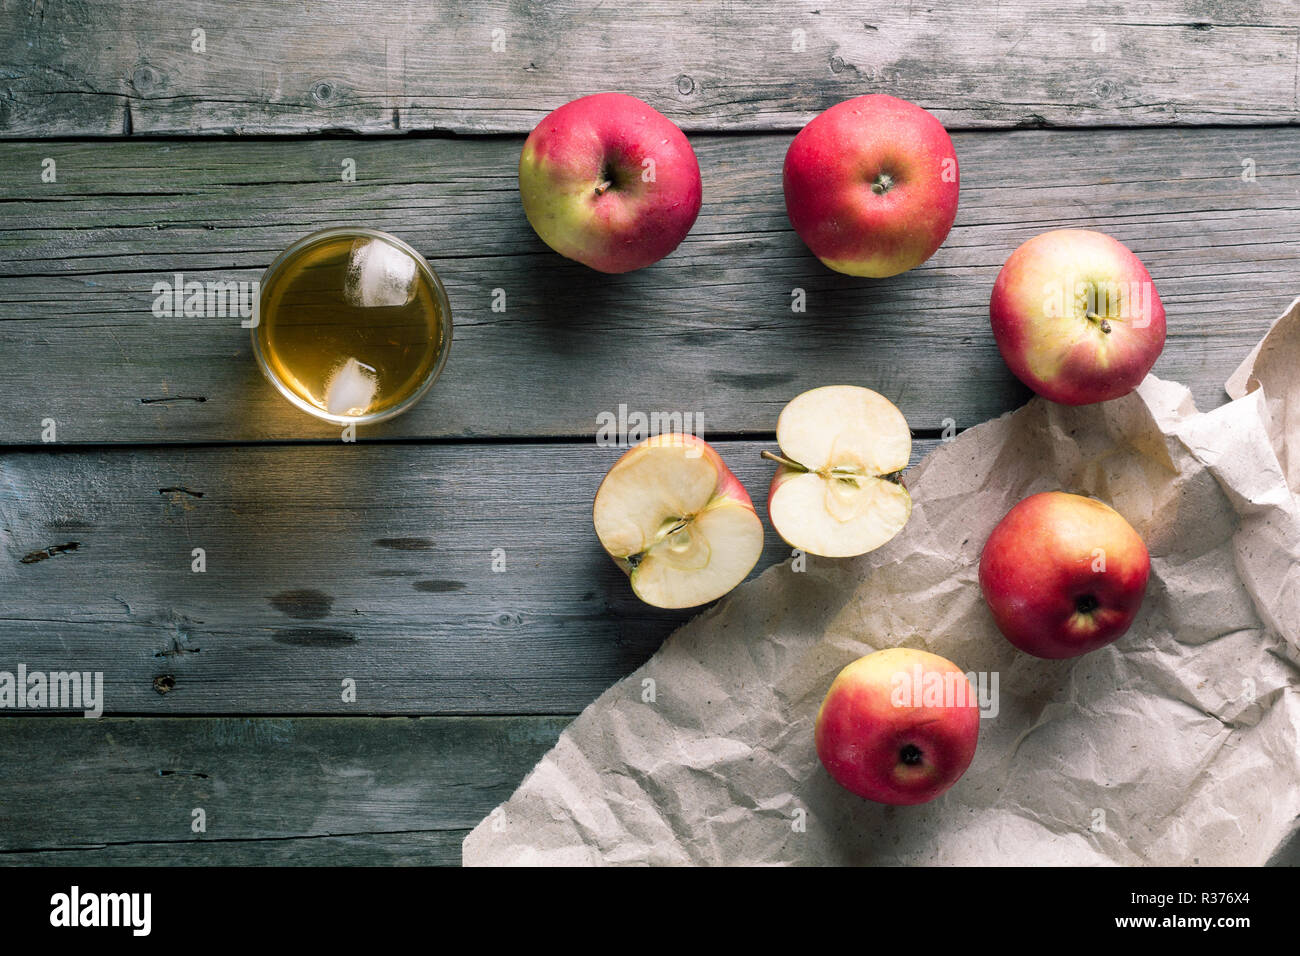 Some apples and a glass of fresh juice Stock Photo